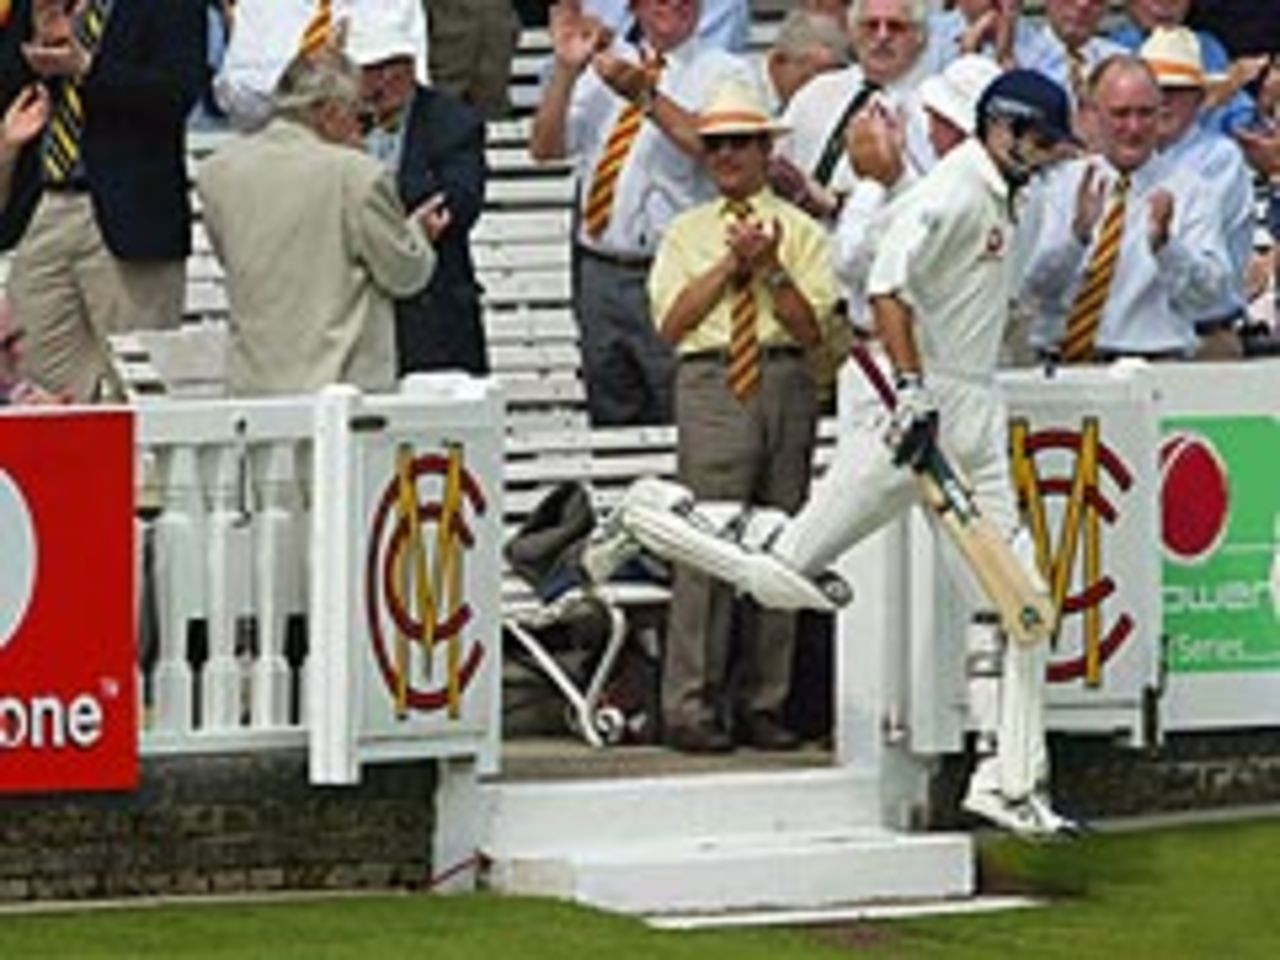 Michael Vaughan leaps into action as England's new captain. But his first morning didn't quite go to plan.